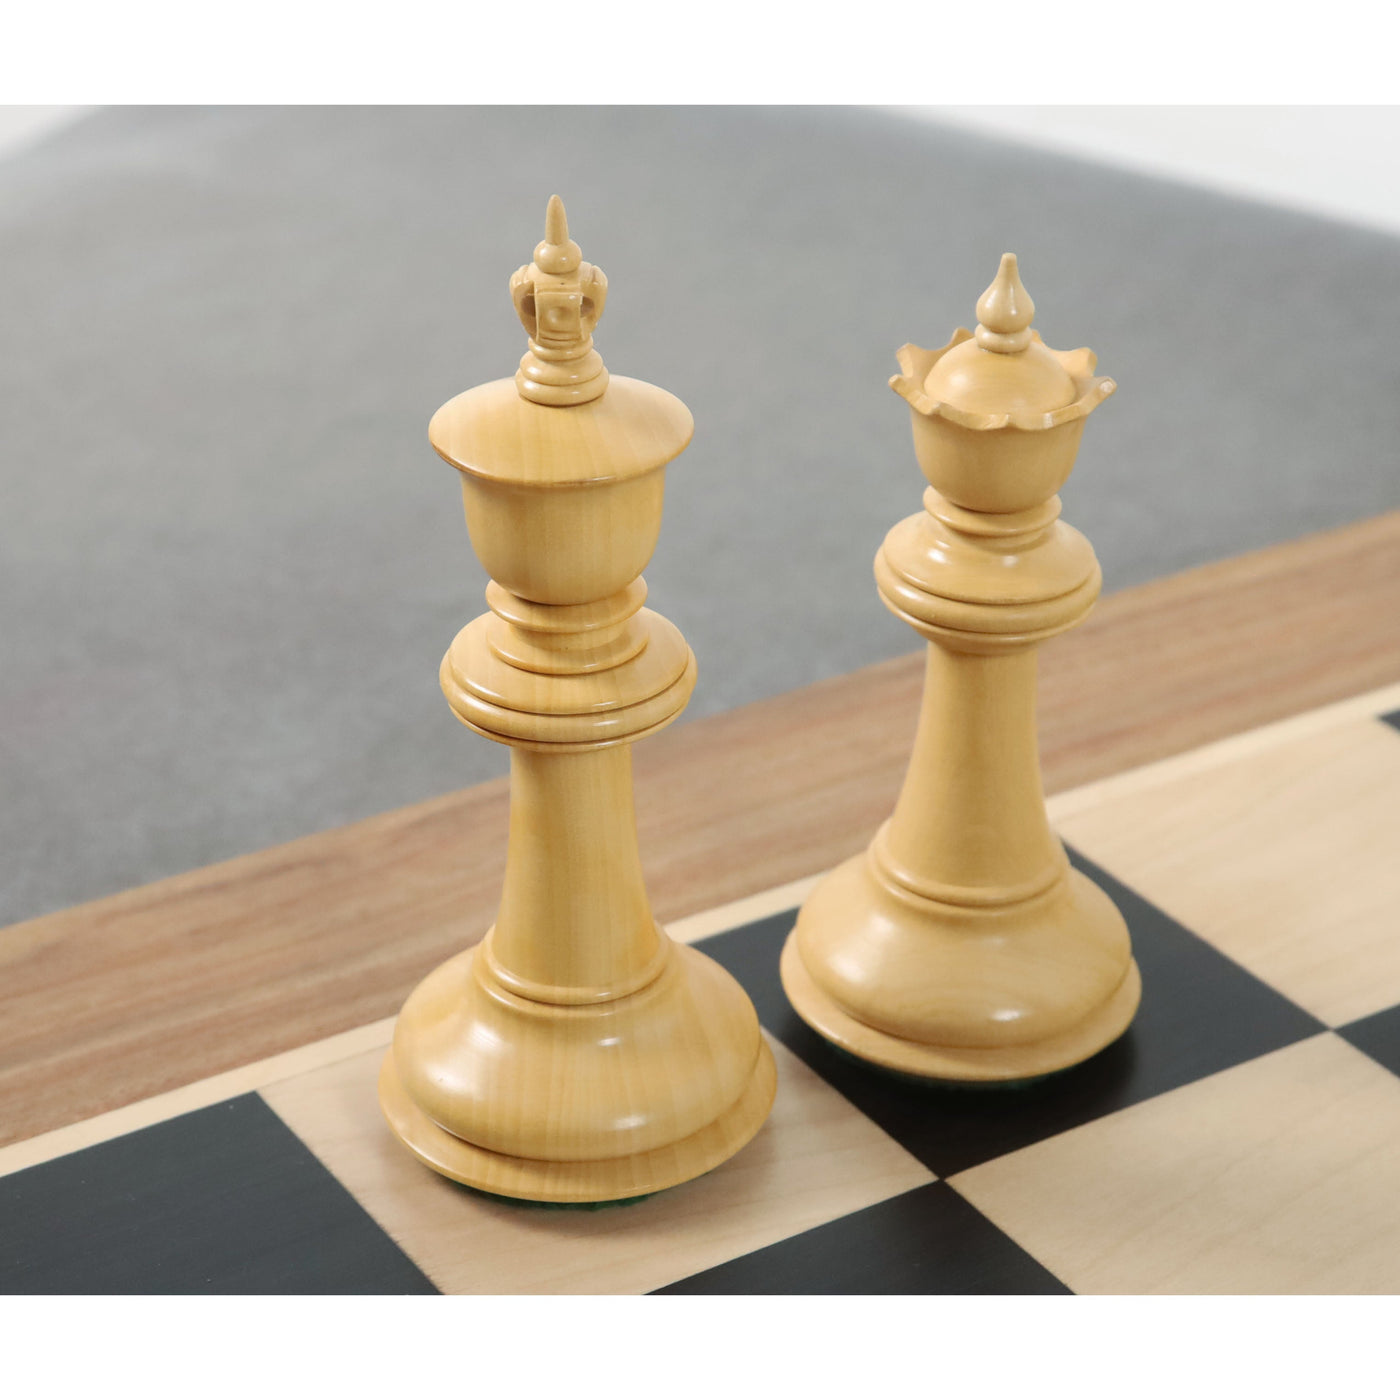 Slightly Imperfect 4.6" Bath Luxury Staunton Chess Set - Chess Pieces Only - Ebony Wood - Triple Weight